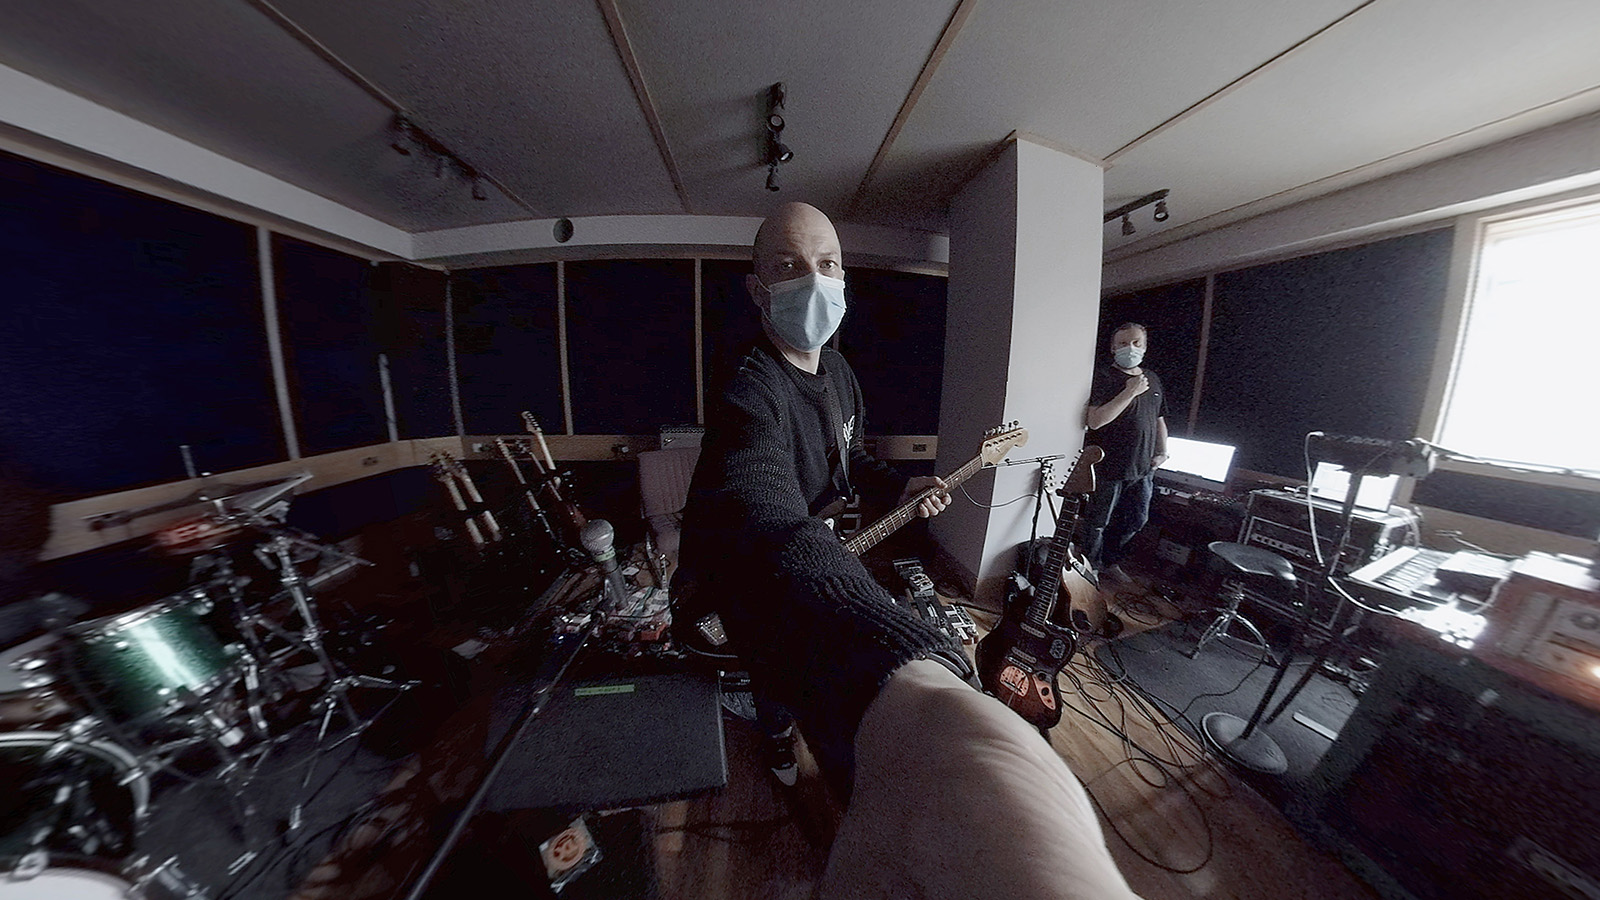 Still from Mogwai: IF THE STARS HAD A SOUND. Band member Stuart Braithwaite in the studio wearing a mask and holding a guitar.